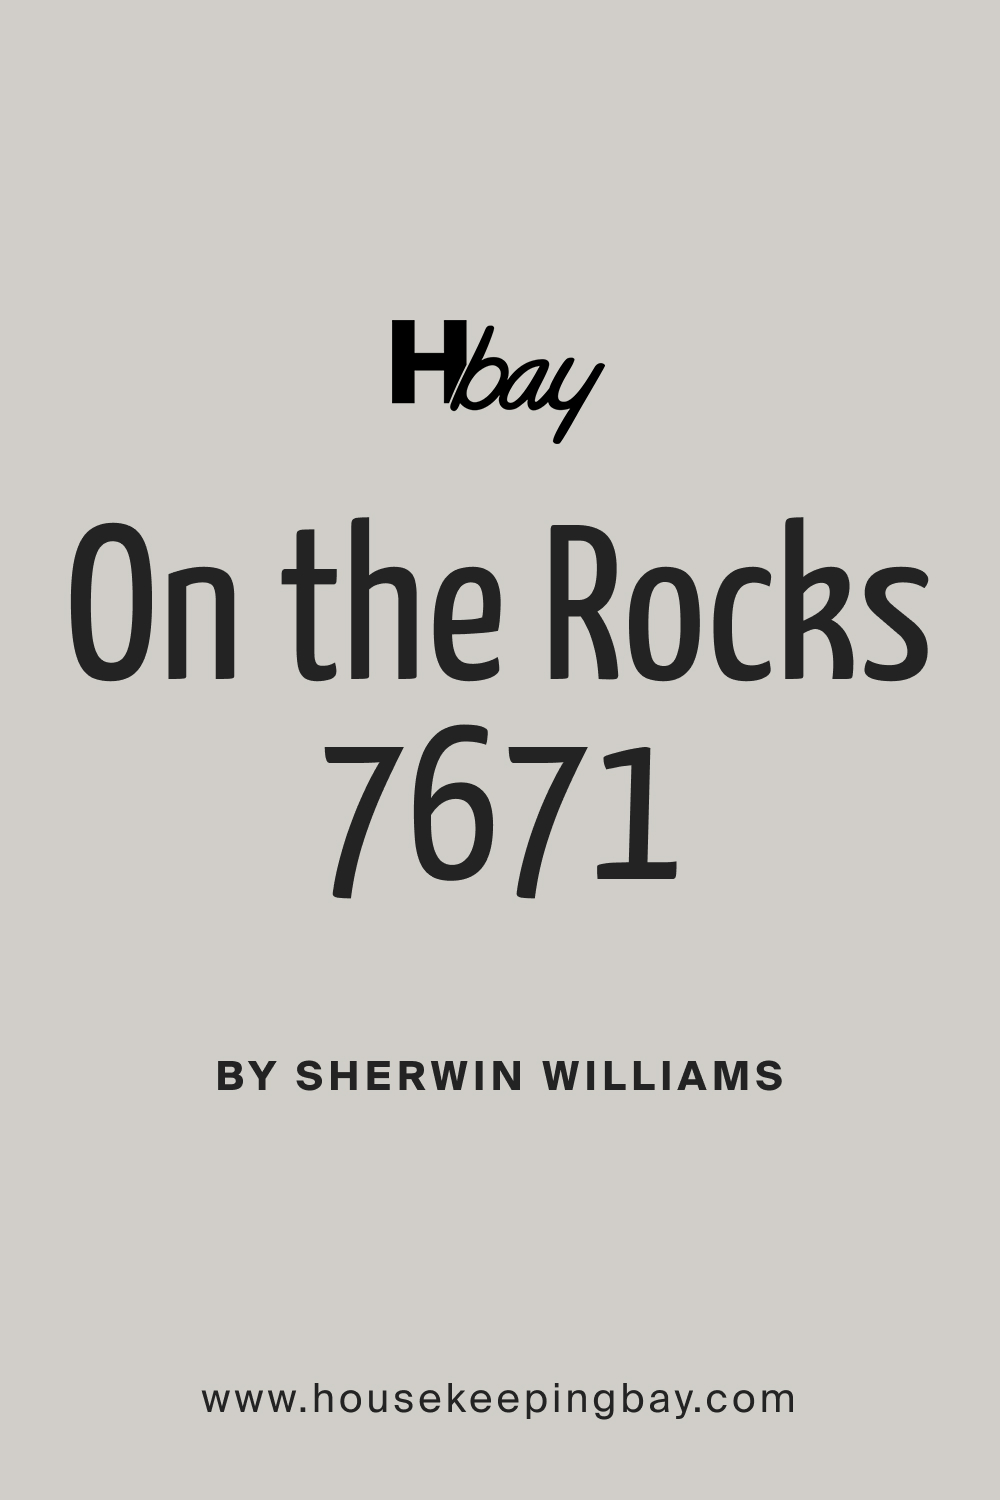 On the Rocks SW 7671 Paint Color by Sherwin Williams